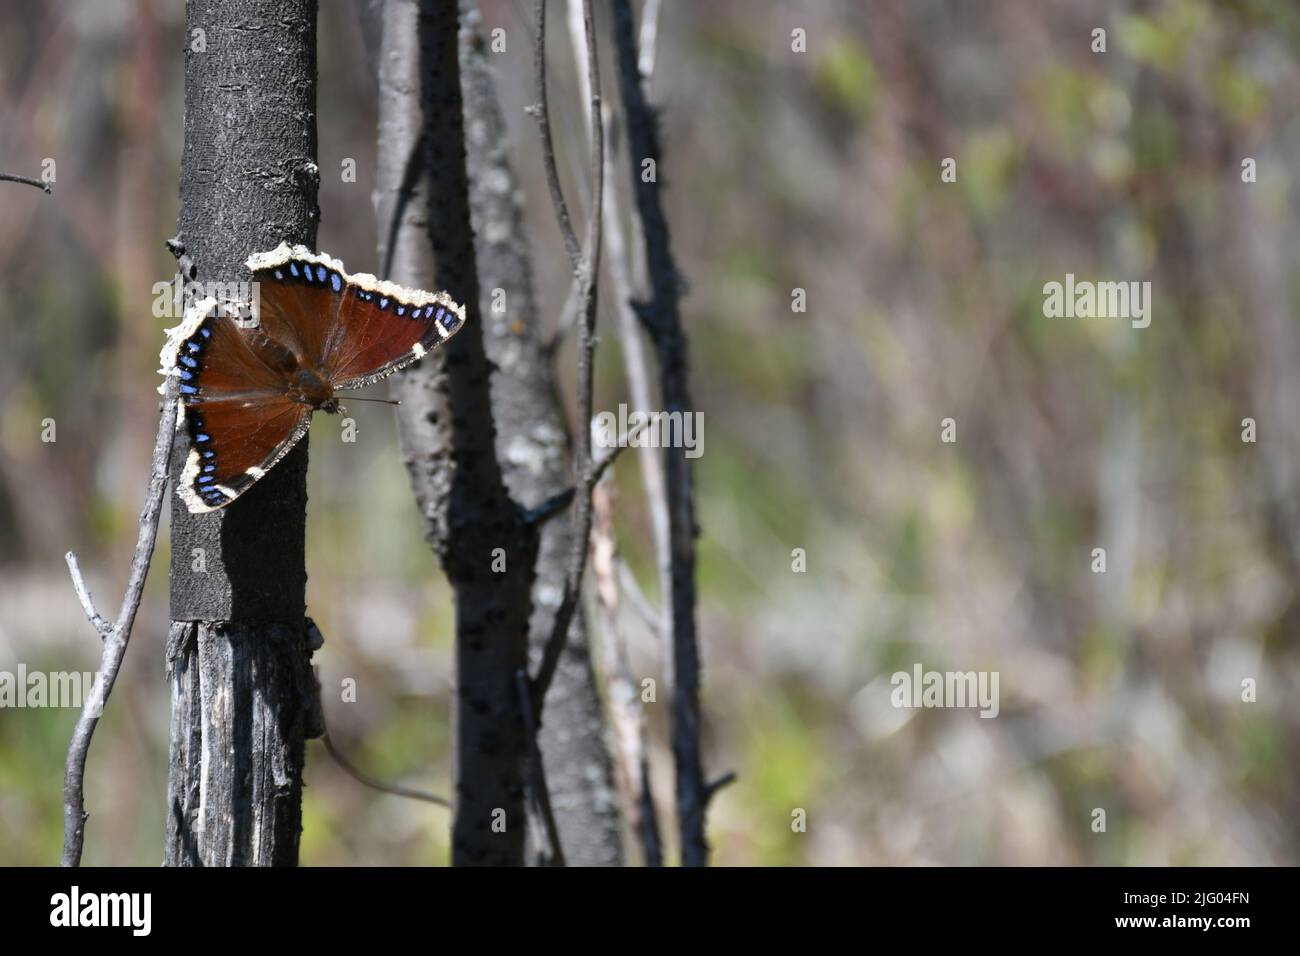 A Mourning Cloak butterfly resting on a tree trunk Stock Photo